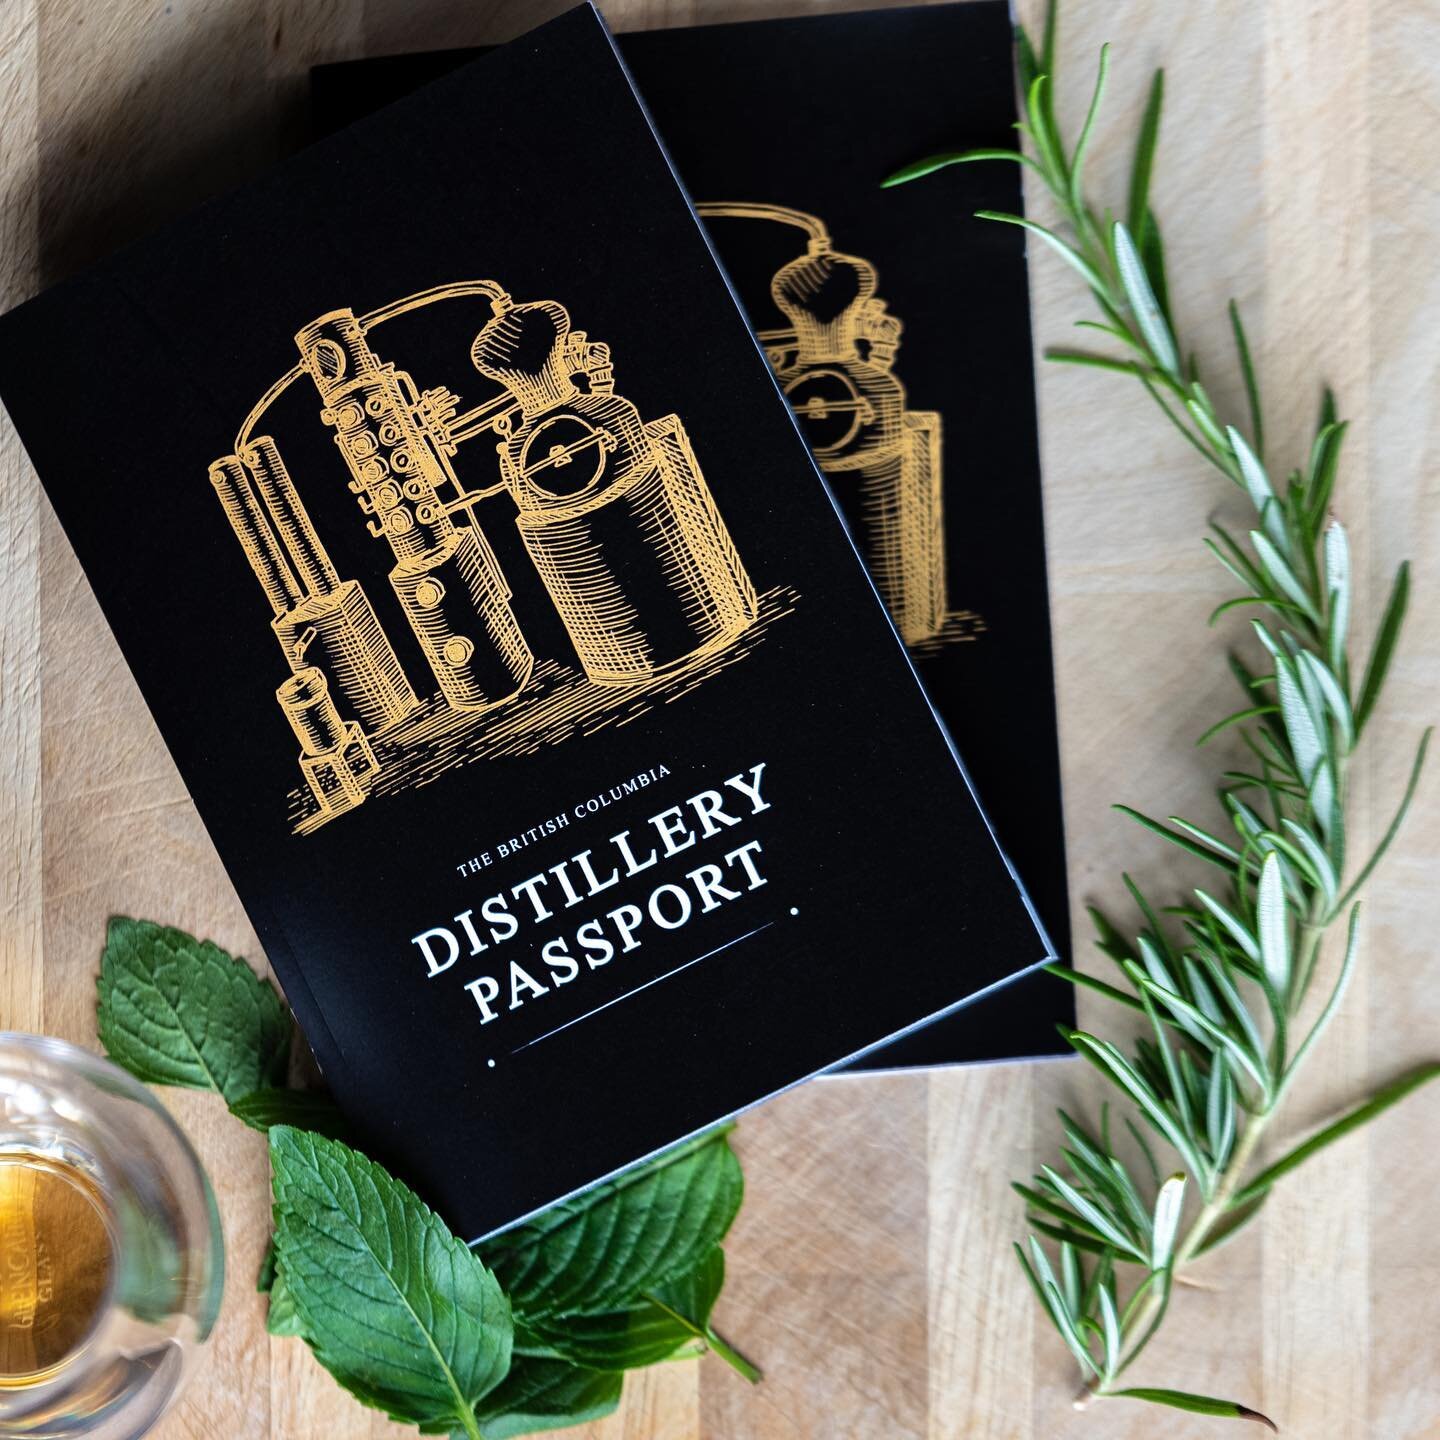 Launching this week in conjunction with @cheeseandmeatfestival @victoriawinefest, the first Distillery Passport for British Columbian Distilleries. Going to be fantastic, link goes live on Wednesday!